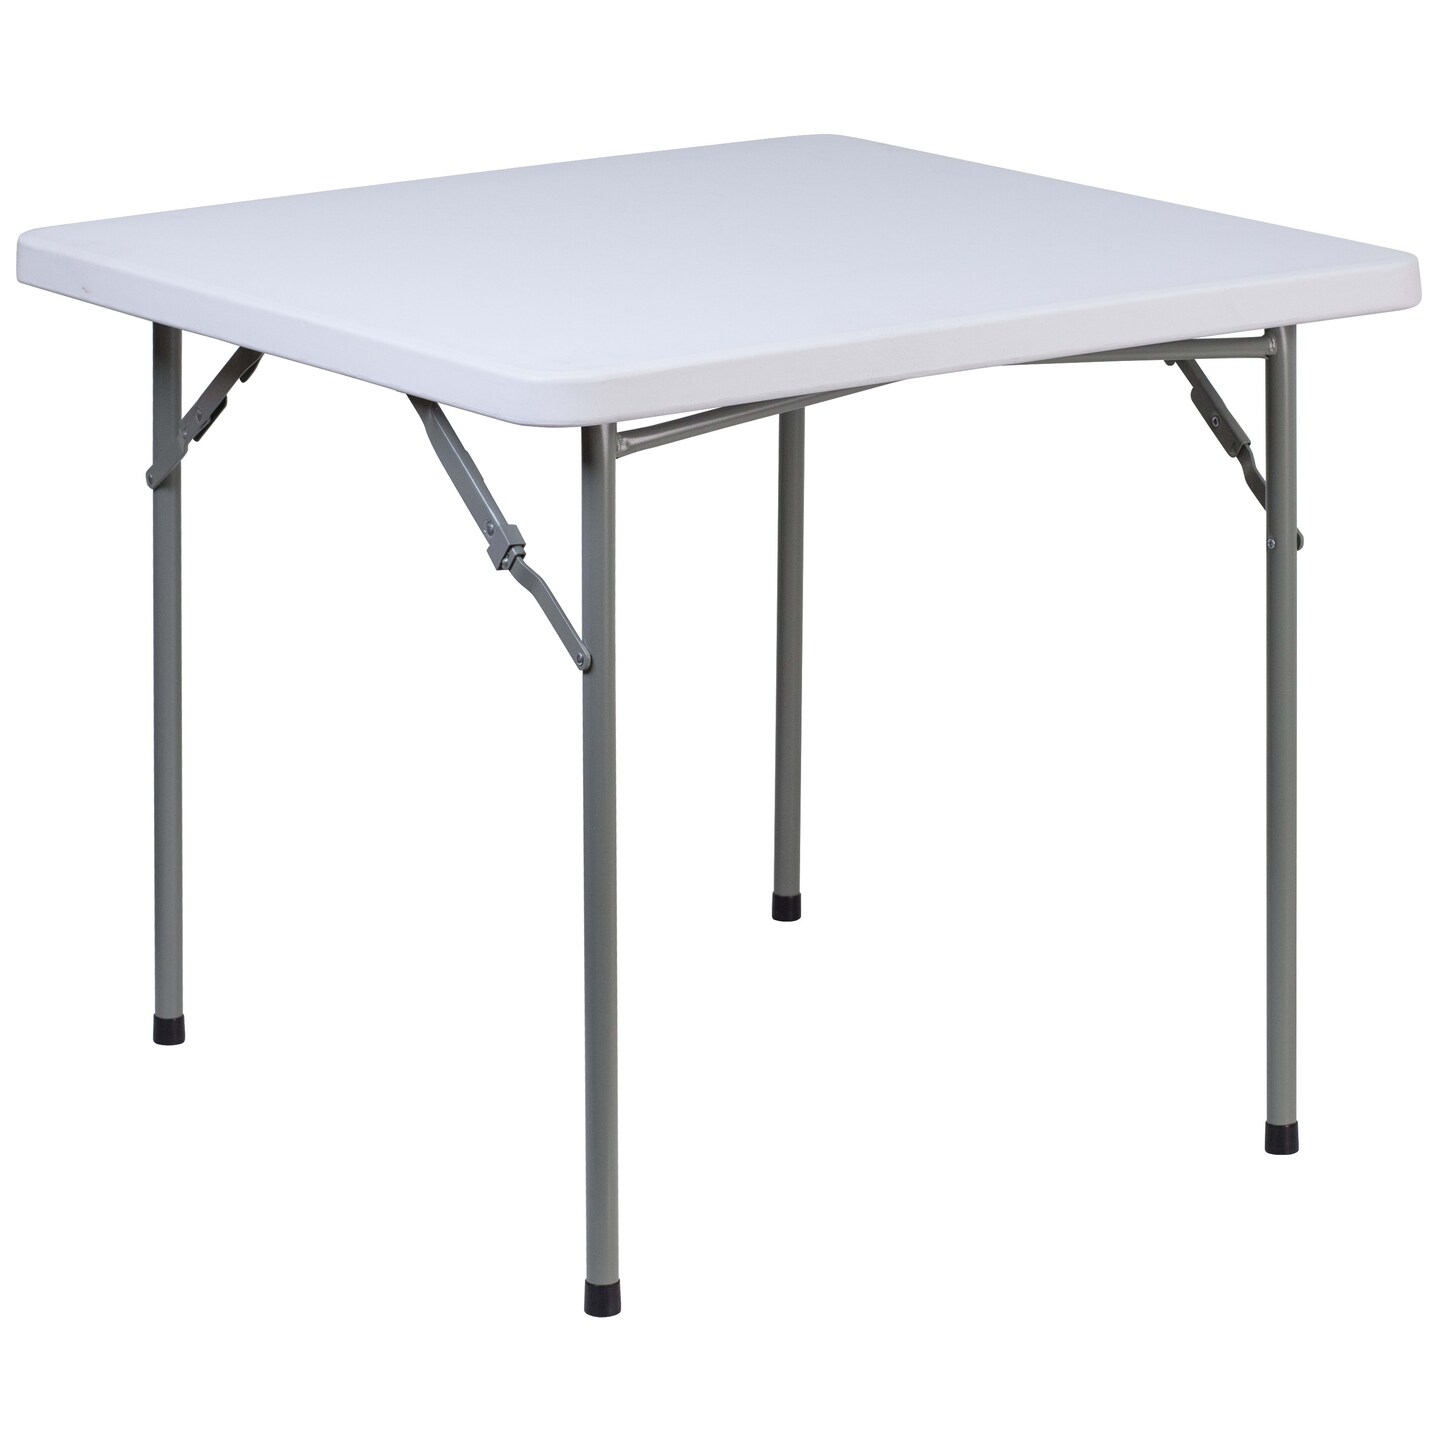 Emma and Oliver 2.81-Foot Square Plastic Folding Table